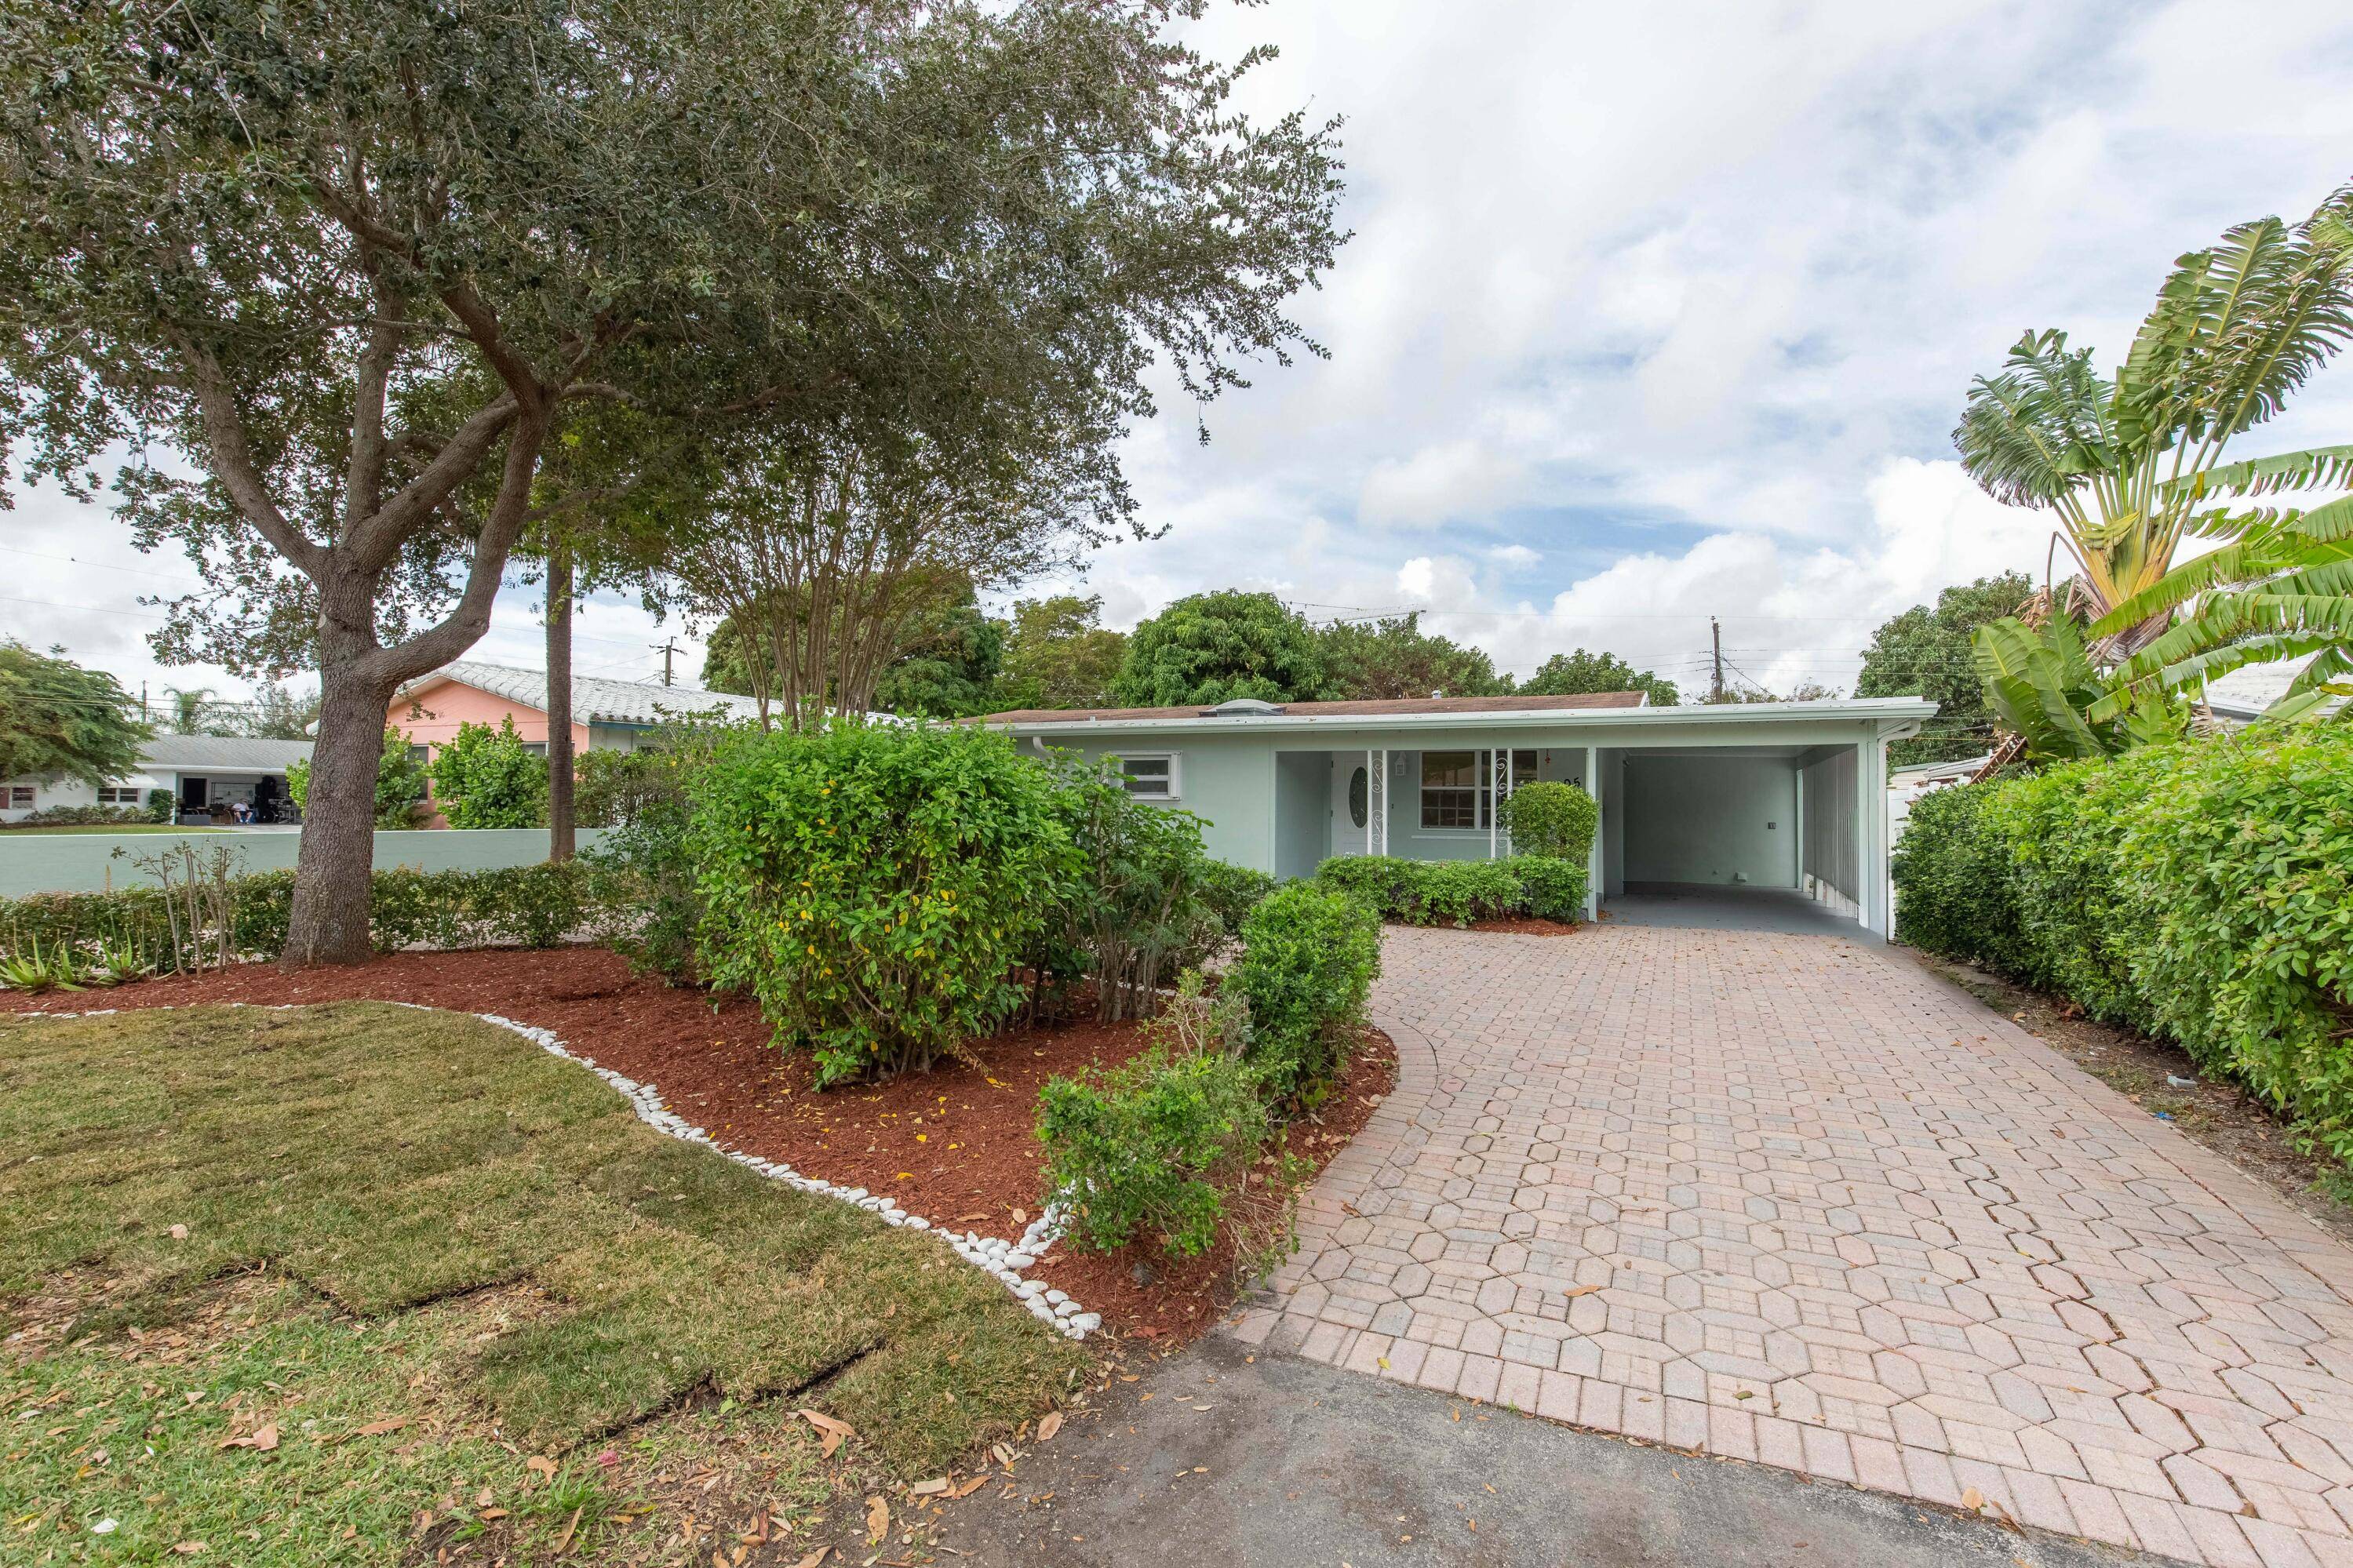 Recently Remodeled 2 2 house on a large 8, 450 sqft lot with new Kitchen cabinets, quartz counter tops, new appliances, updated bathrooms with glass doors.